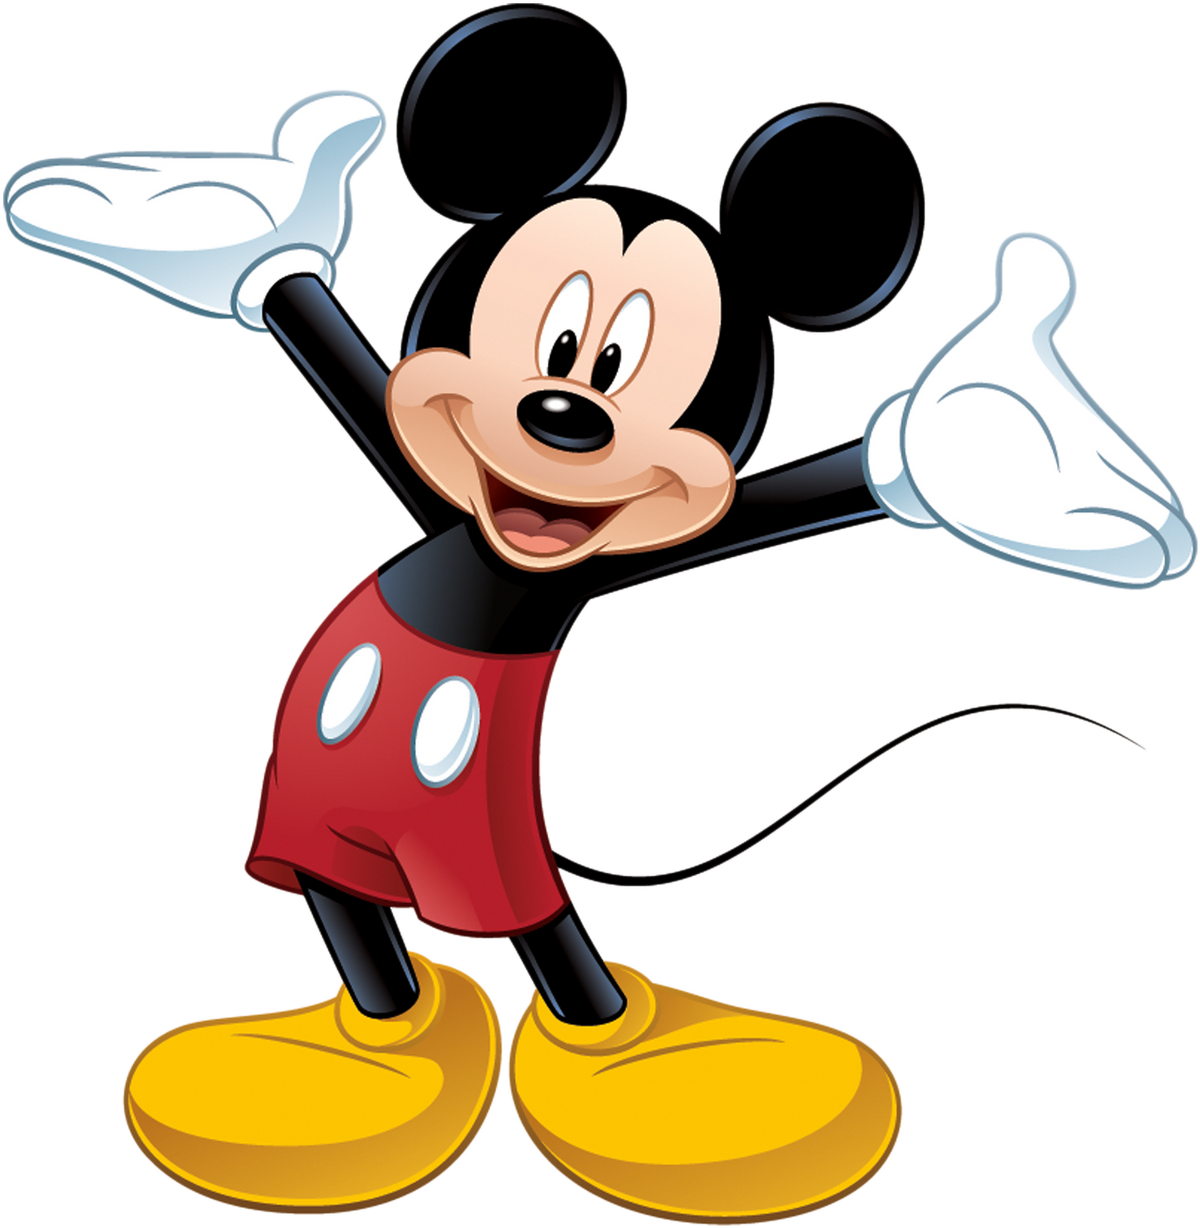 Mickey Mouse (Western Animation) - TV Tropes